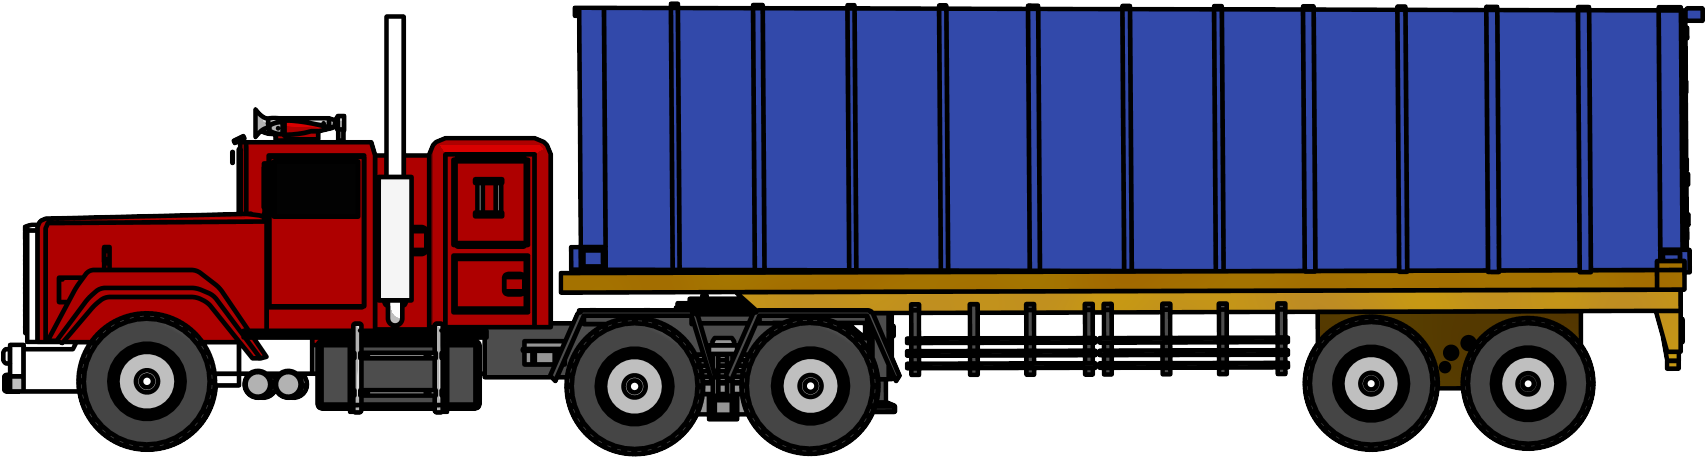 Industrial Truck Big Truck Clipart Png Image Side View - Truck (1726x489)